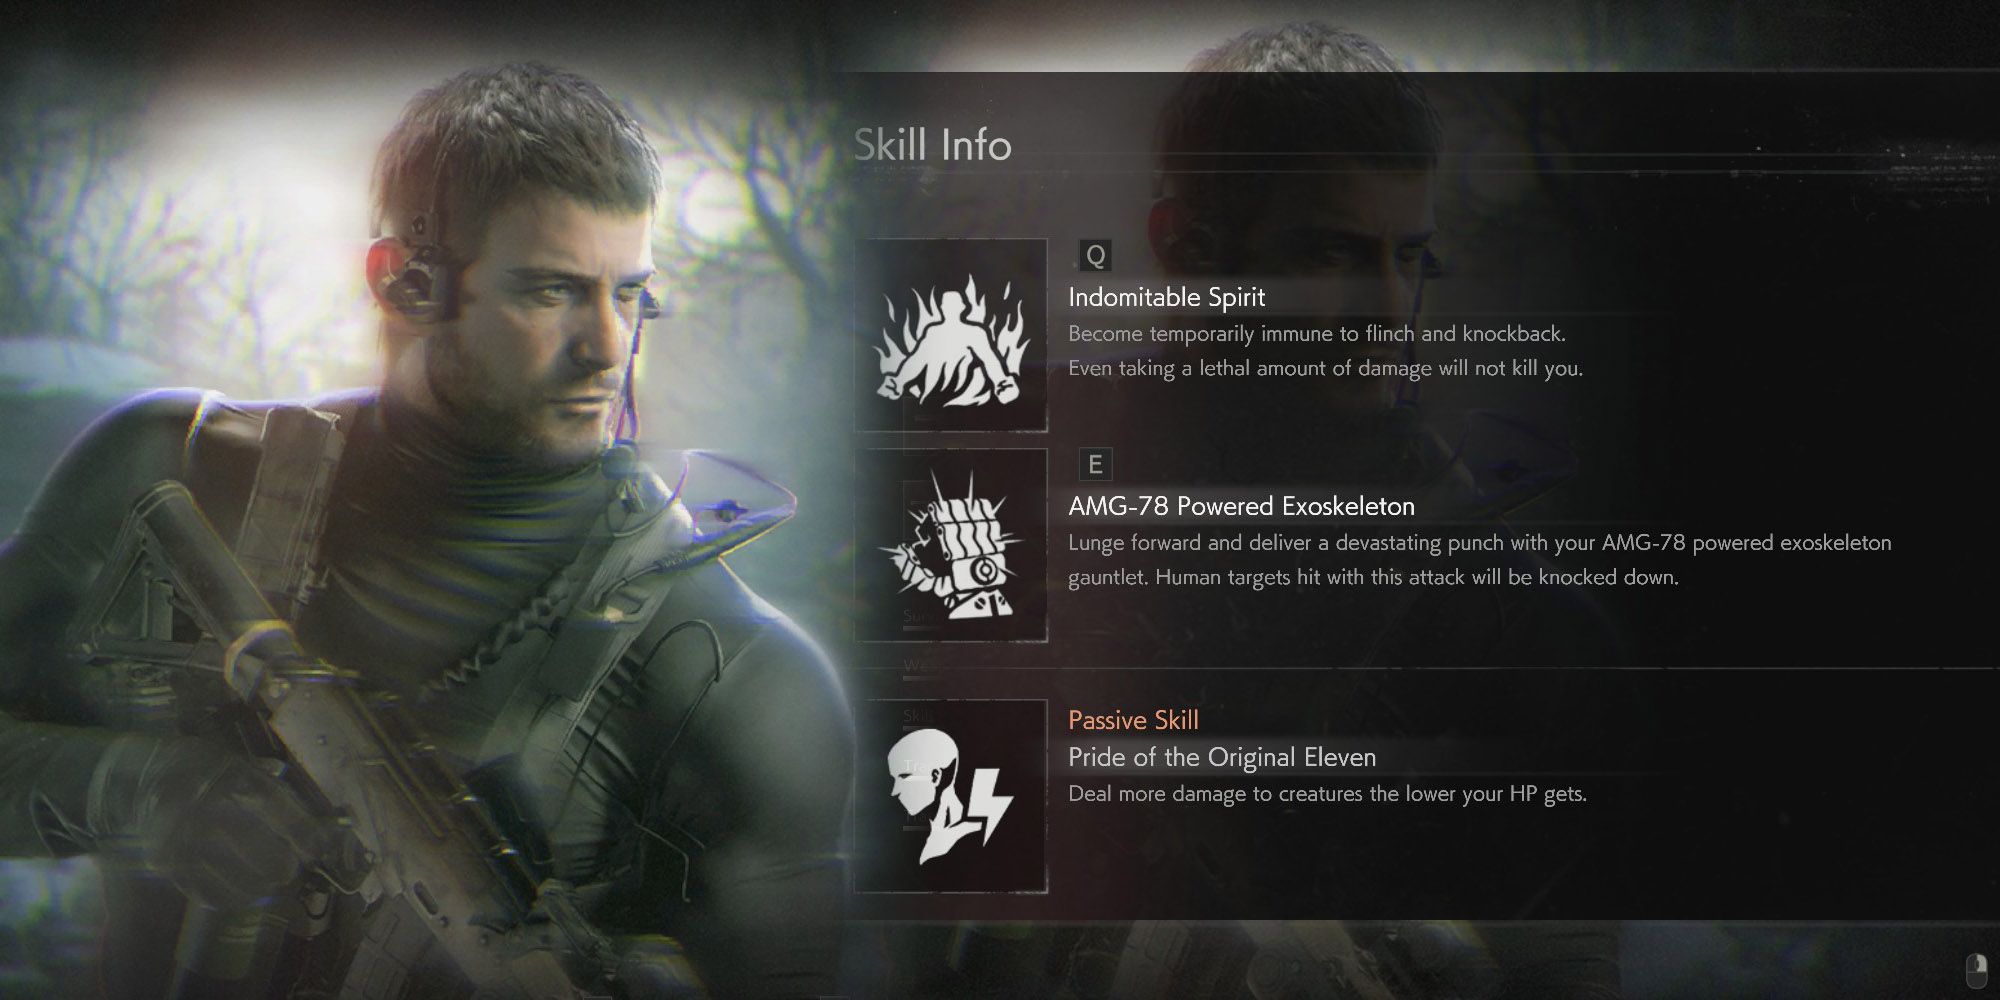 Resident Evil ReVerse - Chris Redfield In-Game Next To Skill Descriptions